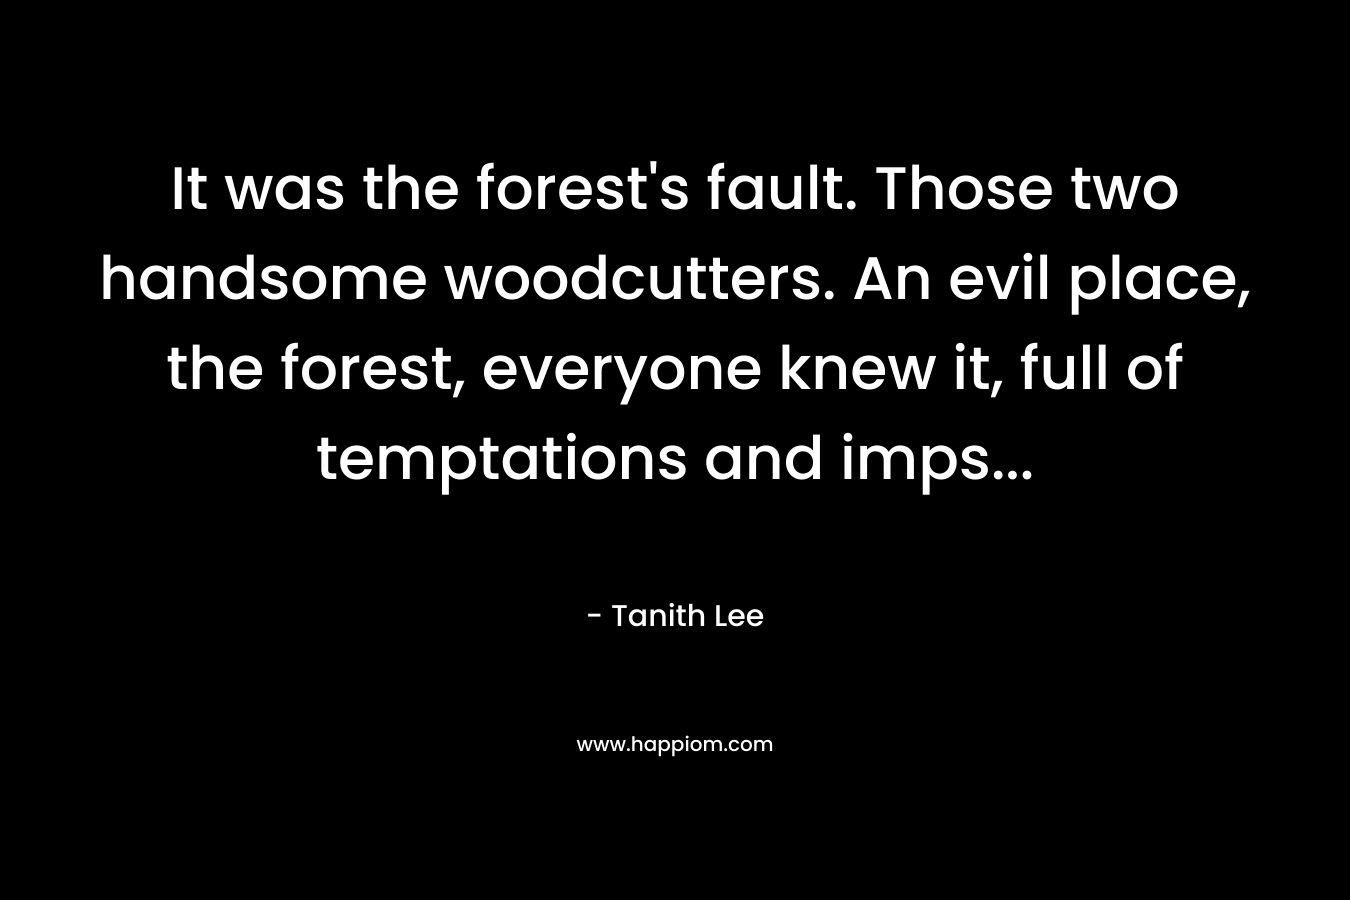 It was the forest's fault. Those two handsome woodcutters. An evil place, the forest, everyone knew it, full of temptations and imps...